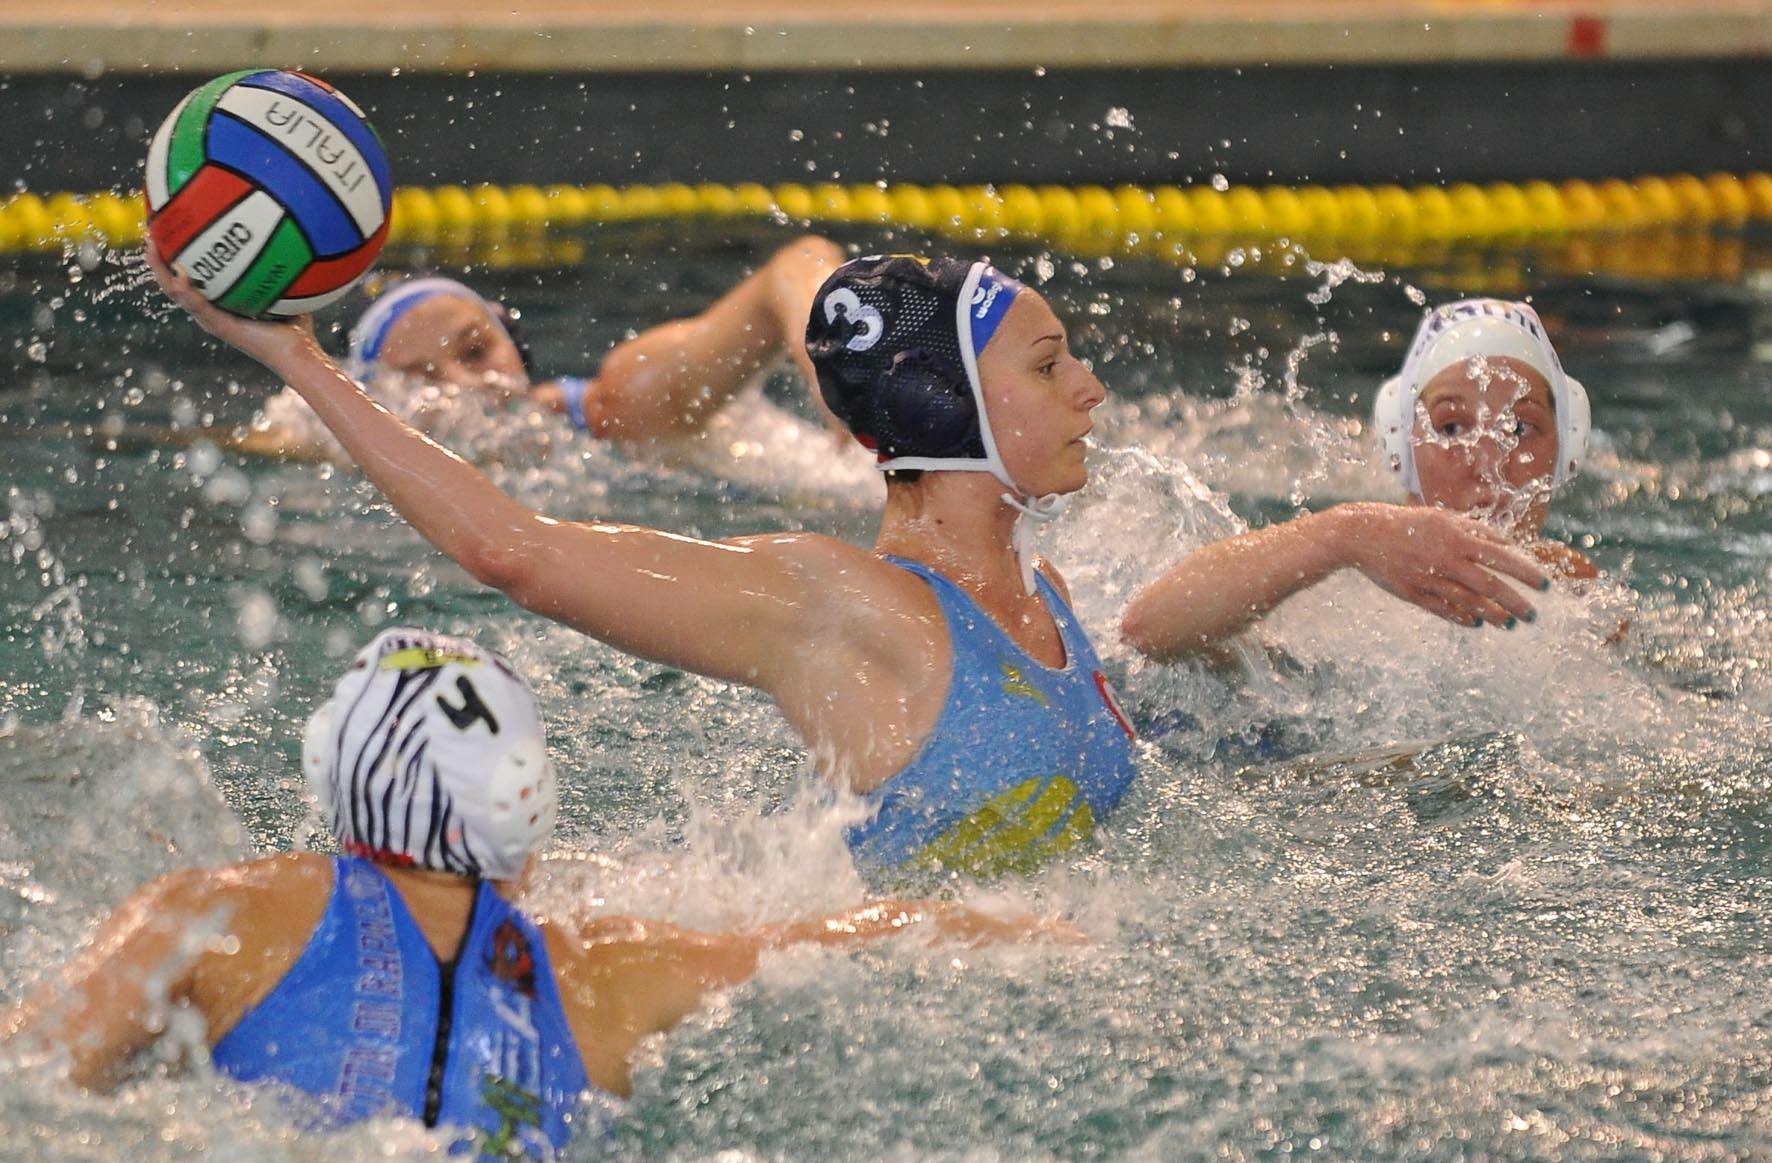 Image shows a water polo player leaping out of the water attempting to shoot the ball.